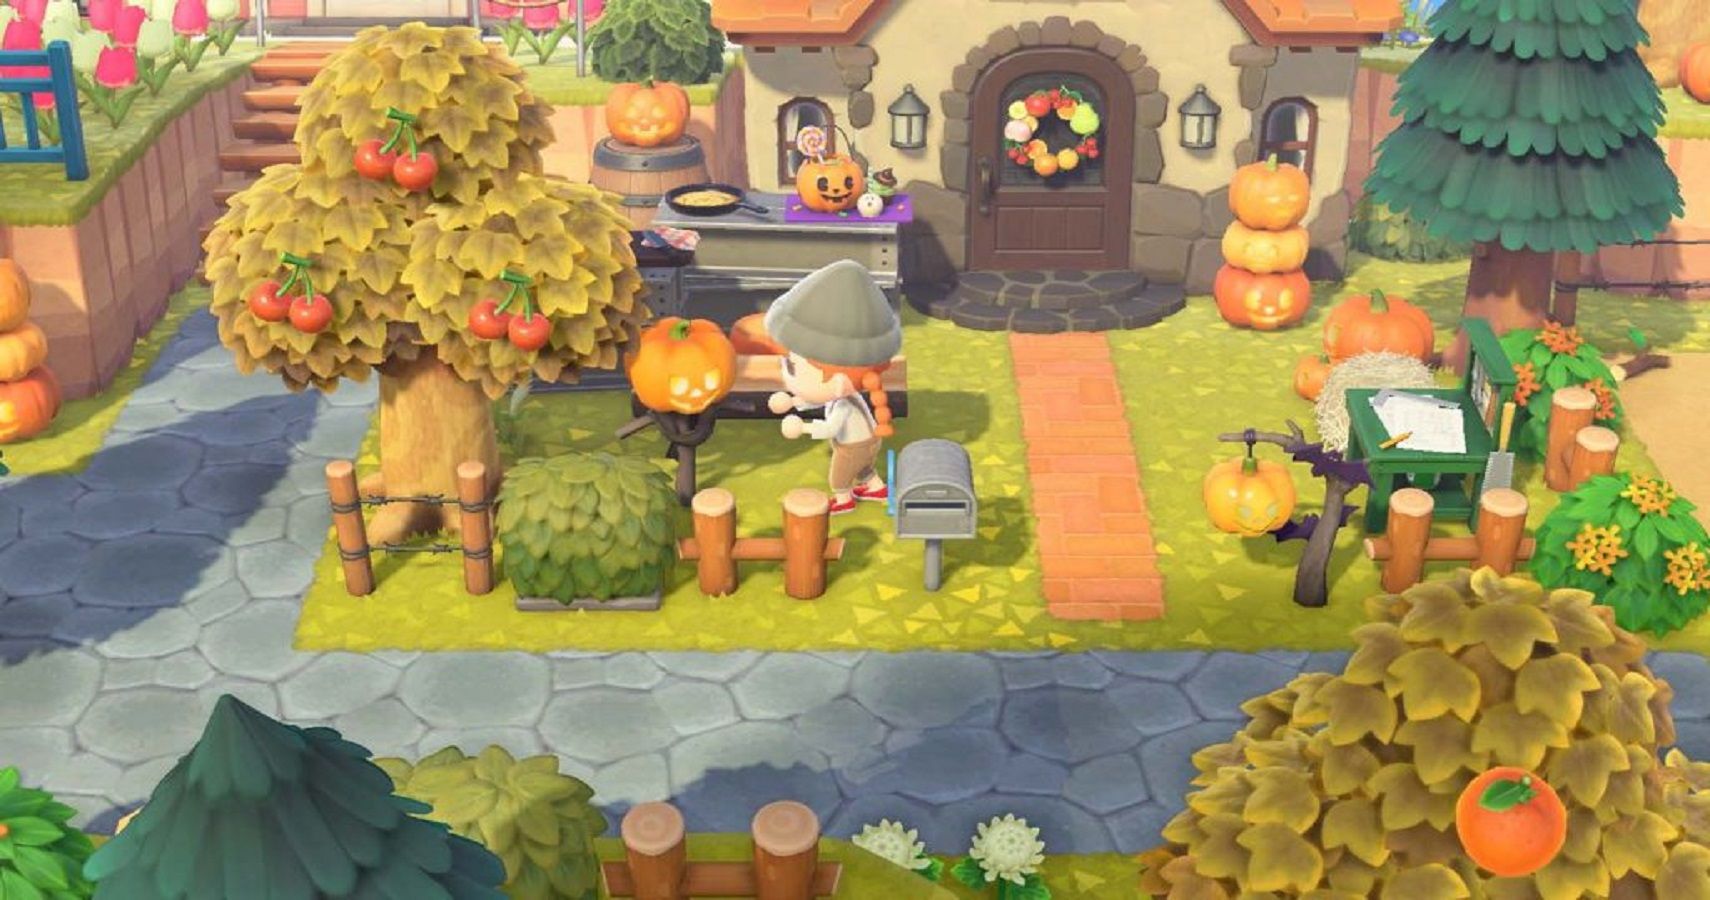 An image from the Animal Crossing: New Horizons Fall update trailer